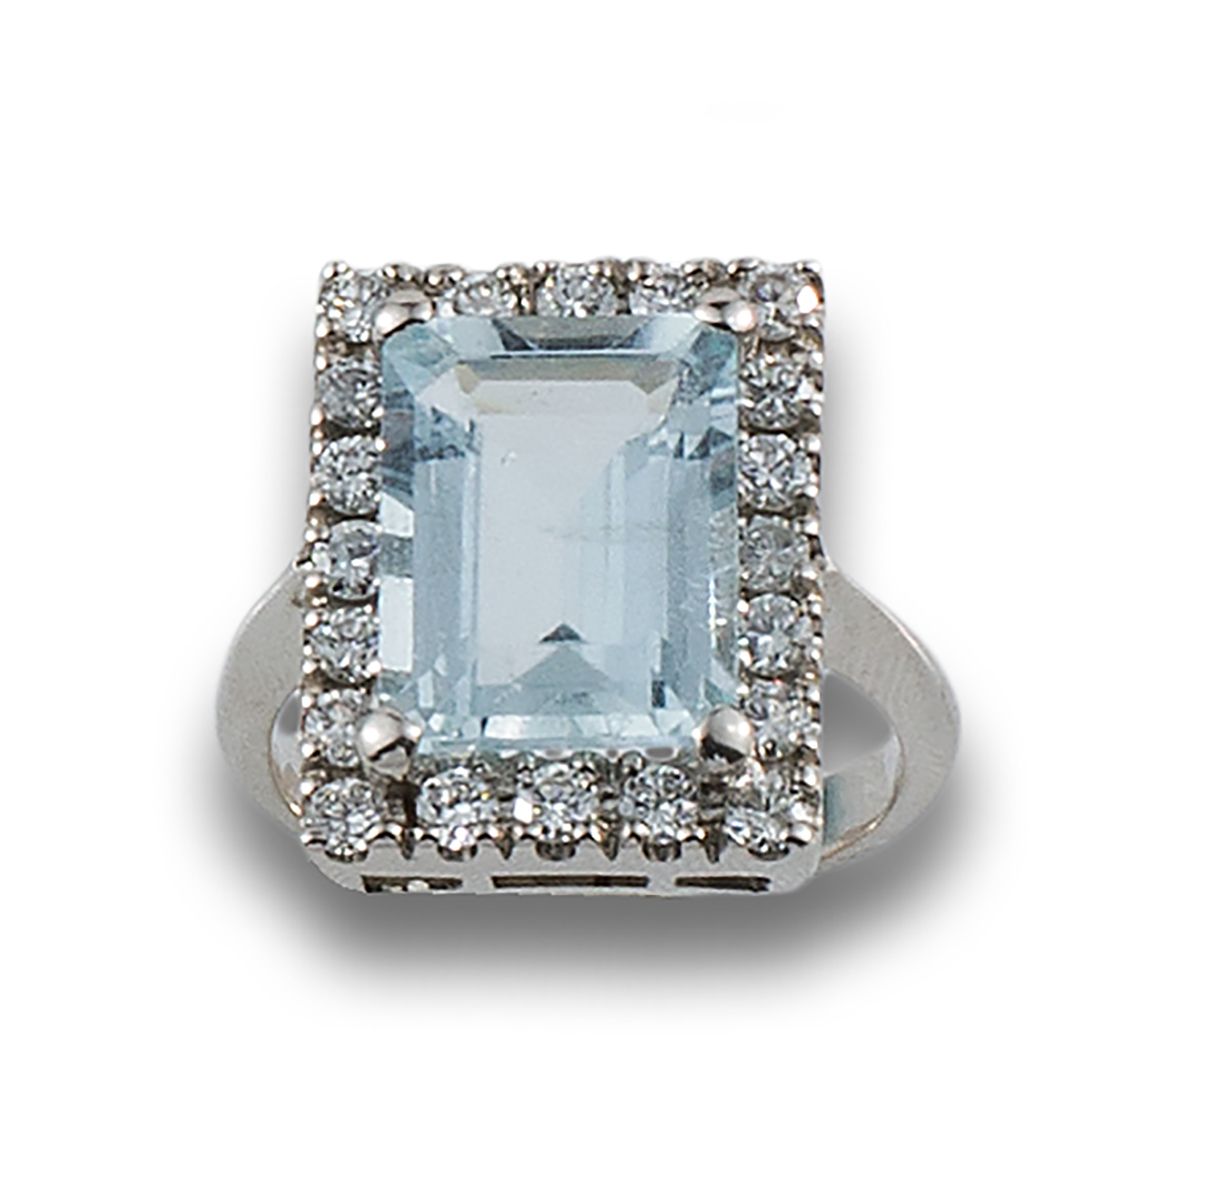 18 kt white gold rosette ring. Formed by a central aquamarine, emerald cut, esti&hellip;